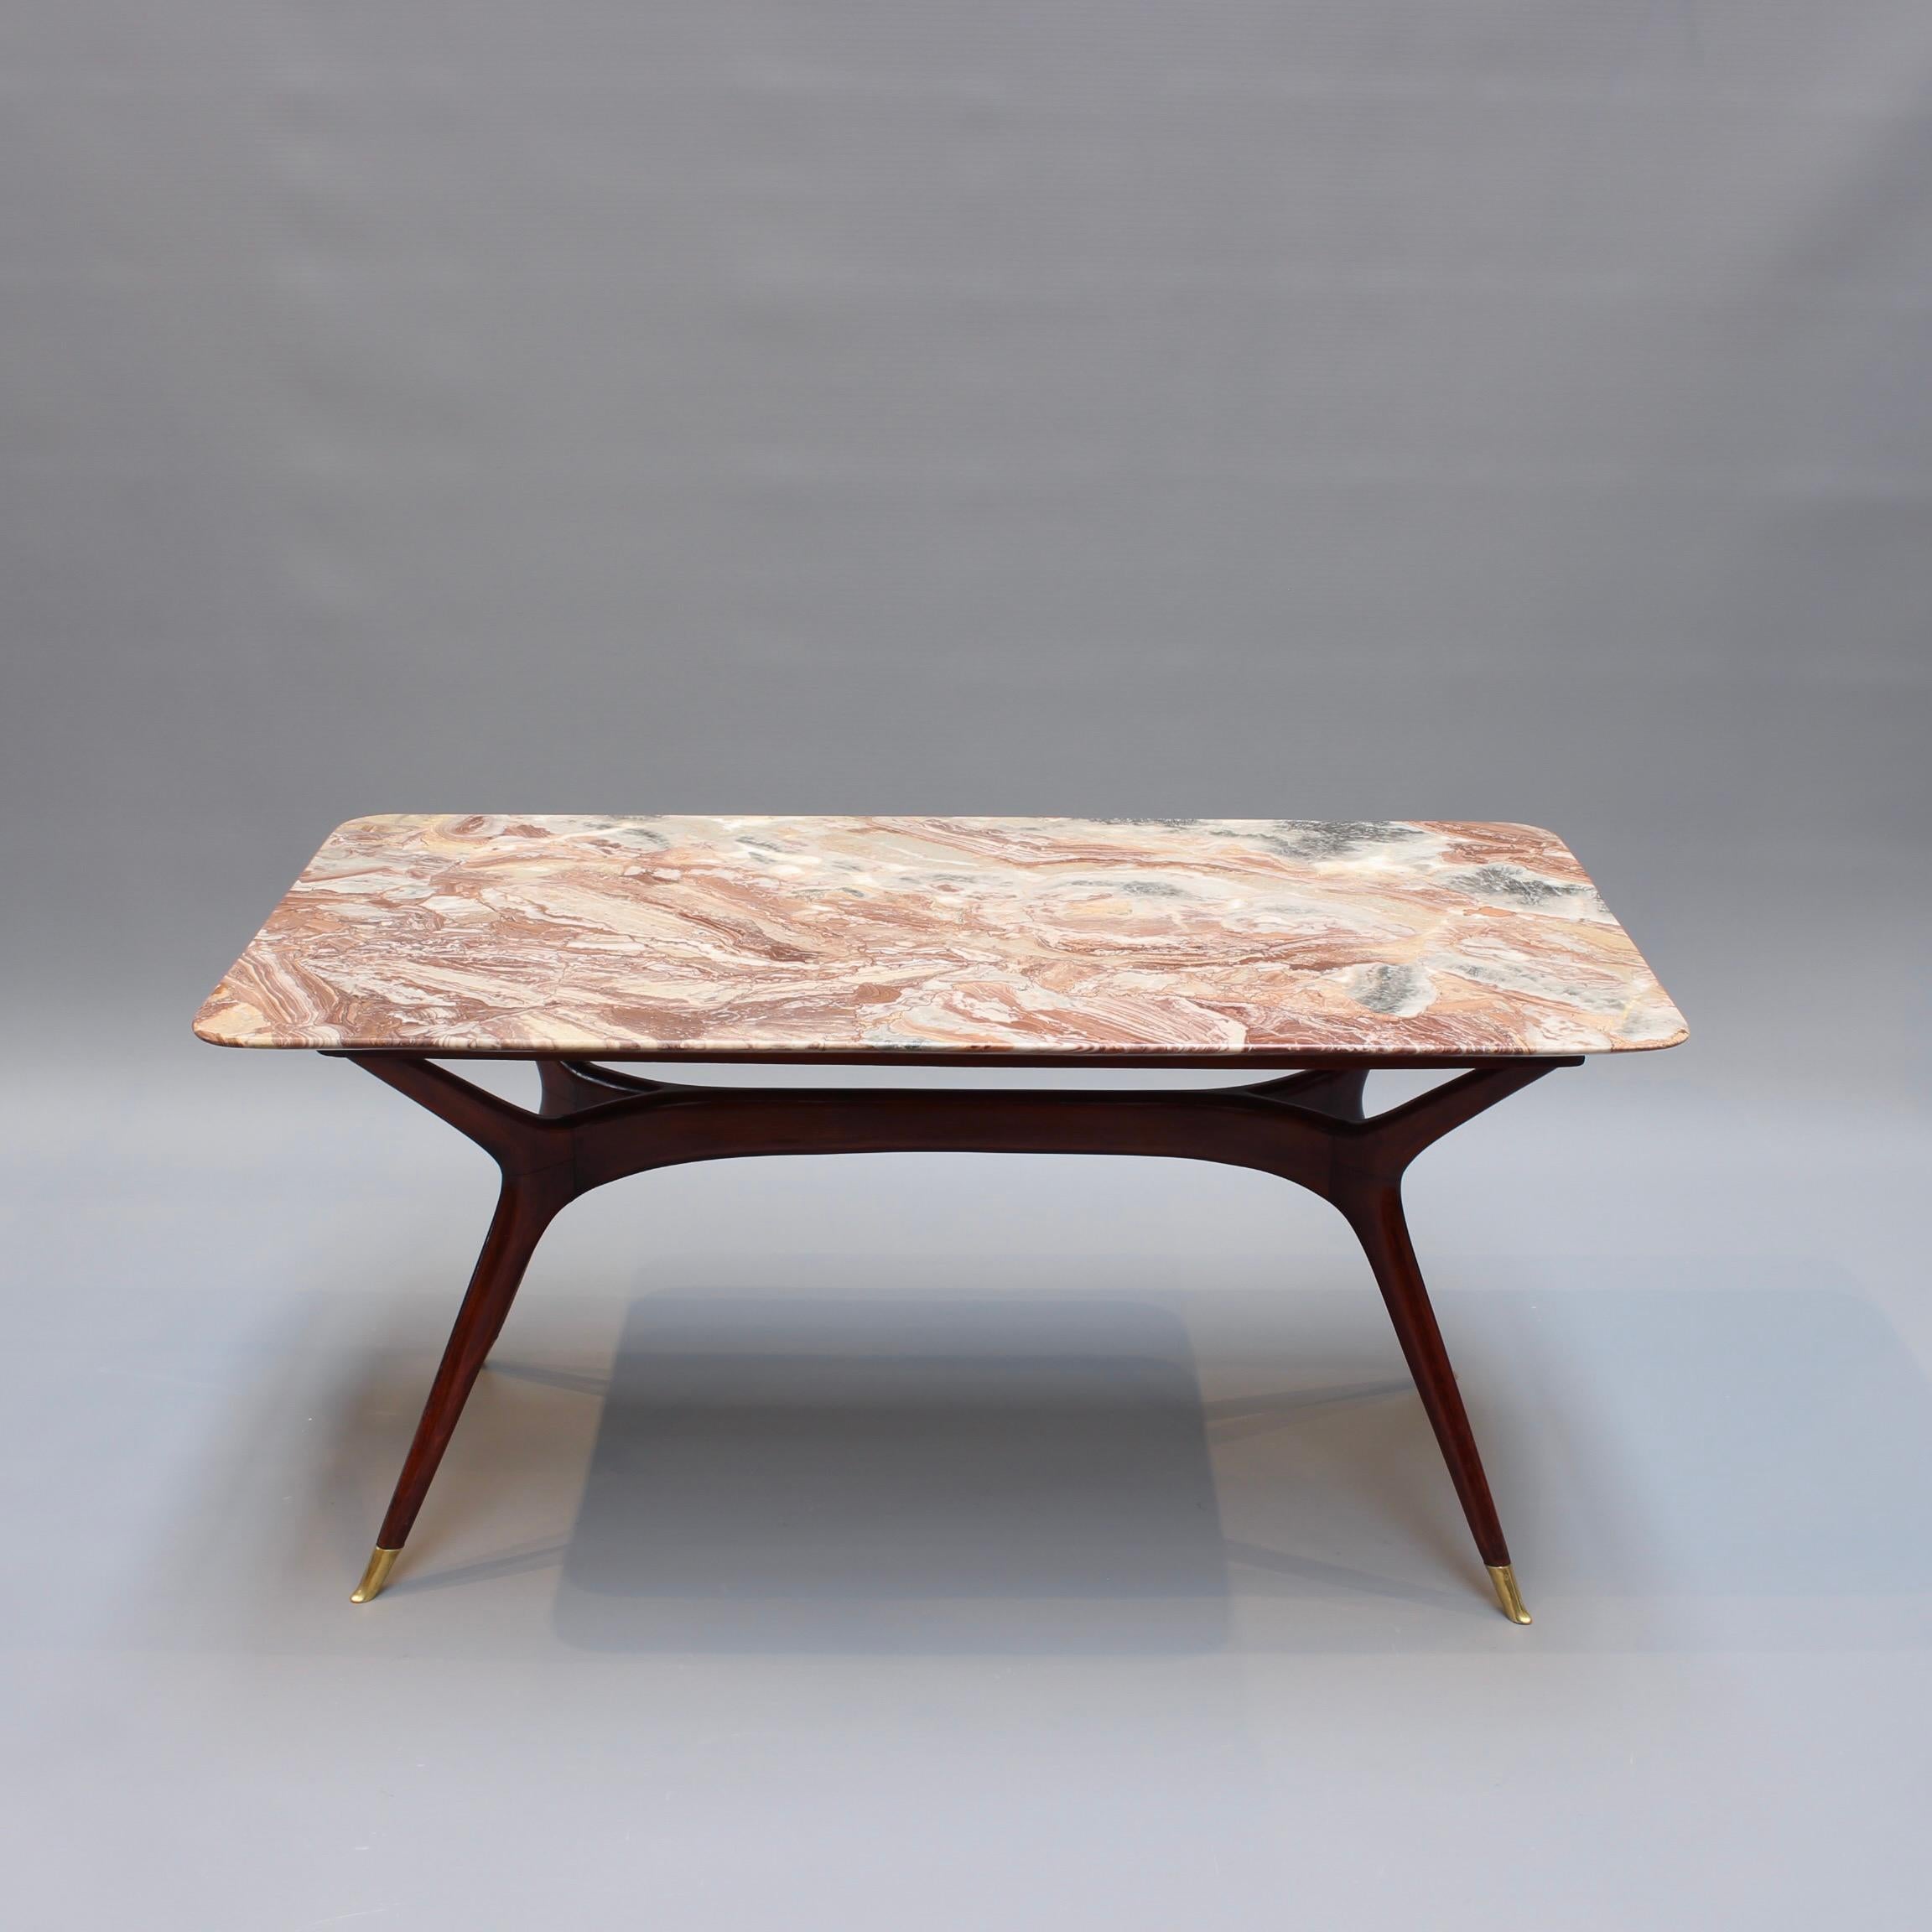 Mid-Century Italian coffee table attributed to Ico Parisi (1950s). A mostly reddish, rectangular marble top sits upon a very stylish base consisting of Parisi's iconic wooden legs and brass feet. The legs are constructed using softwoods often cut